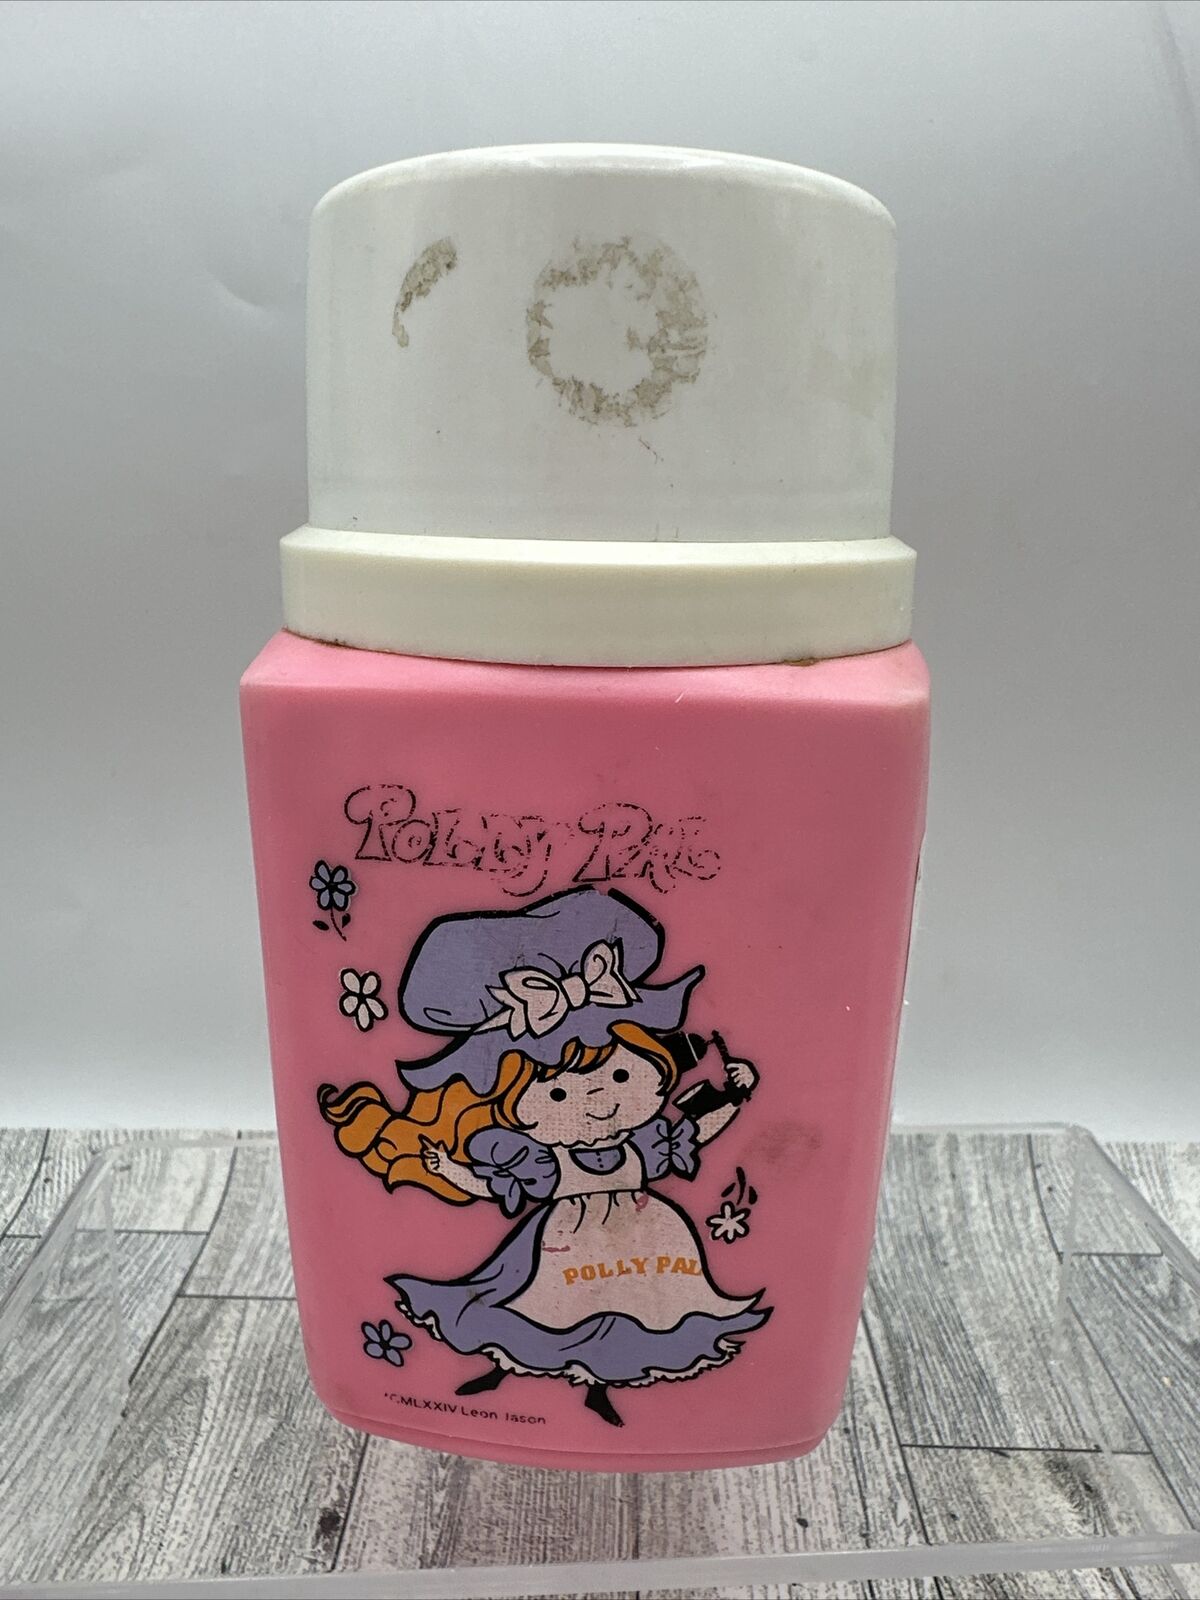 Vintage 1974 Polly Pal Original Thermos Complete with stopper for Lunchbox